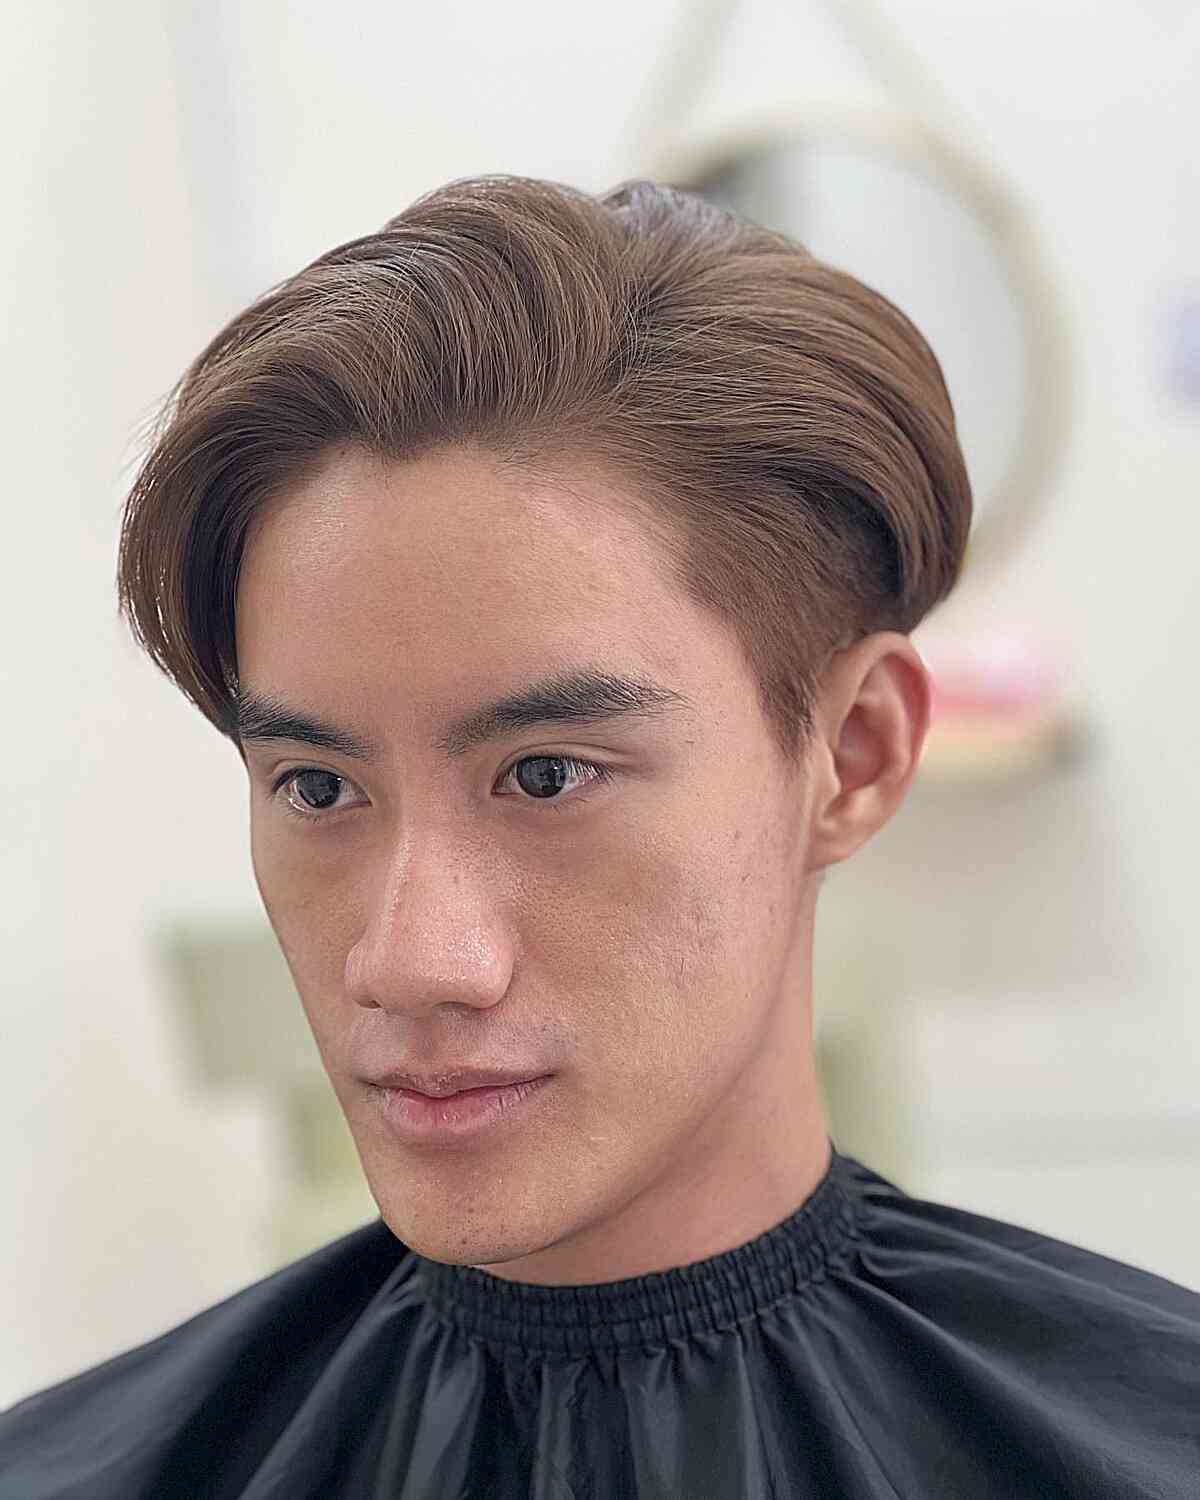 Kpop Side-Swept Comma Haircut for Men with Longer faces